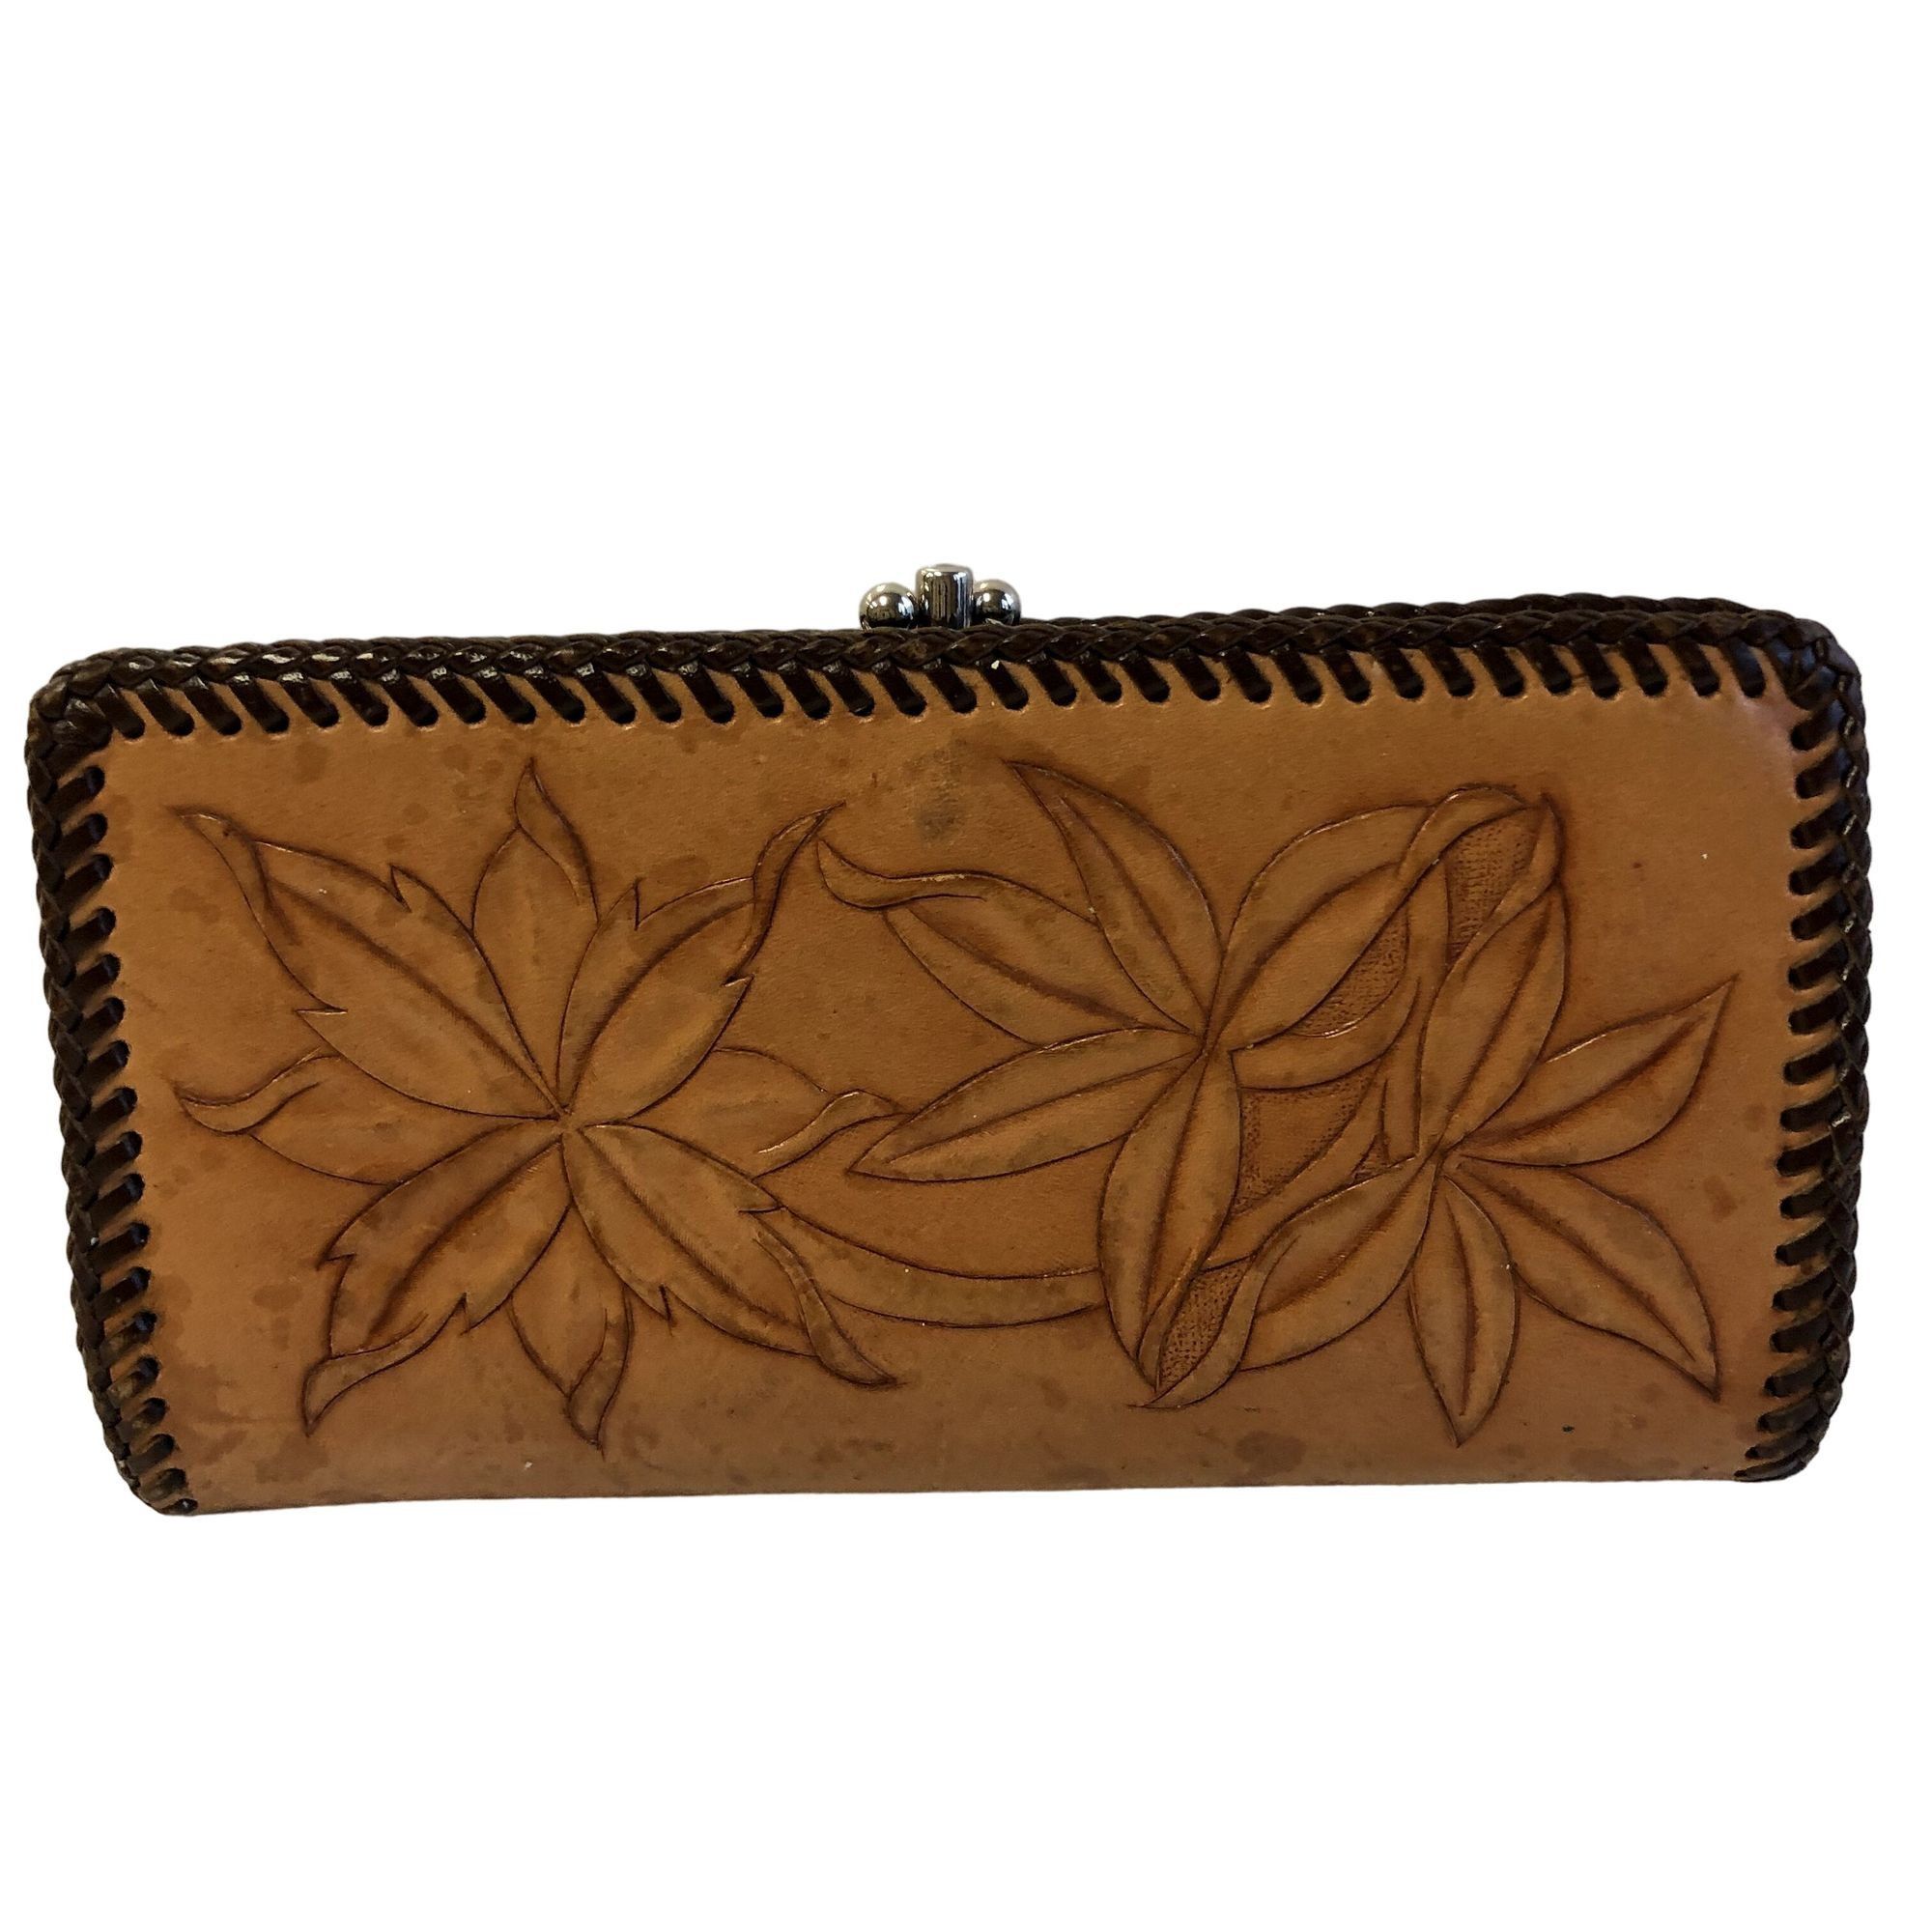 Unkwn 70s HANDMADE Tooled FLORAL Leather LACED Wallet Clutch Purse Size ONE SIZE - 2 Preview